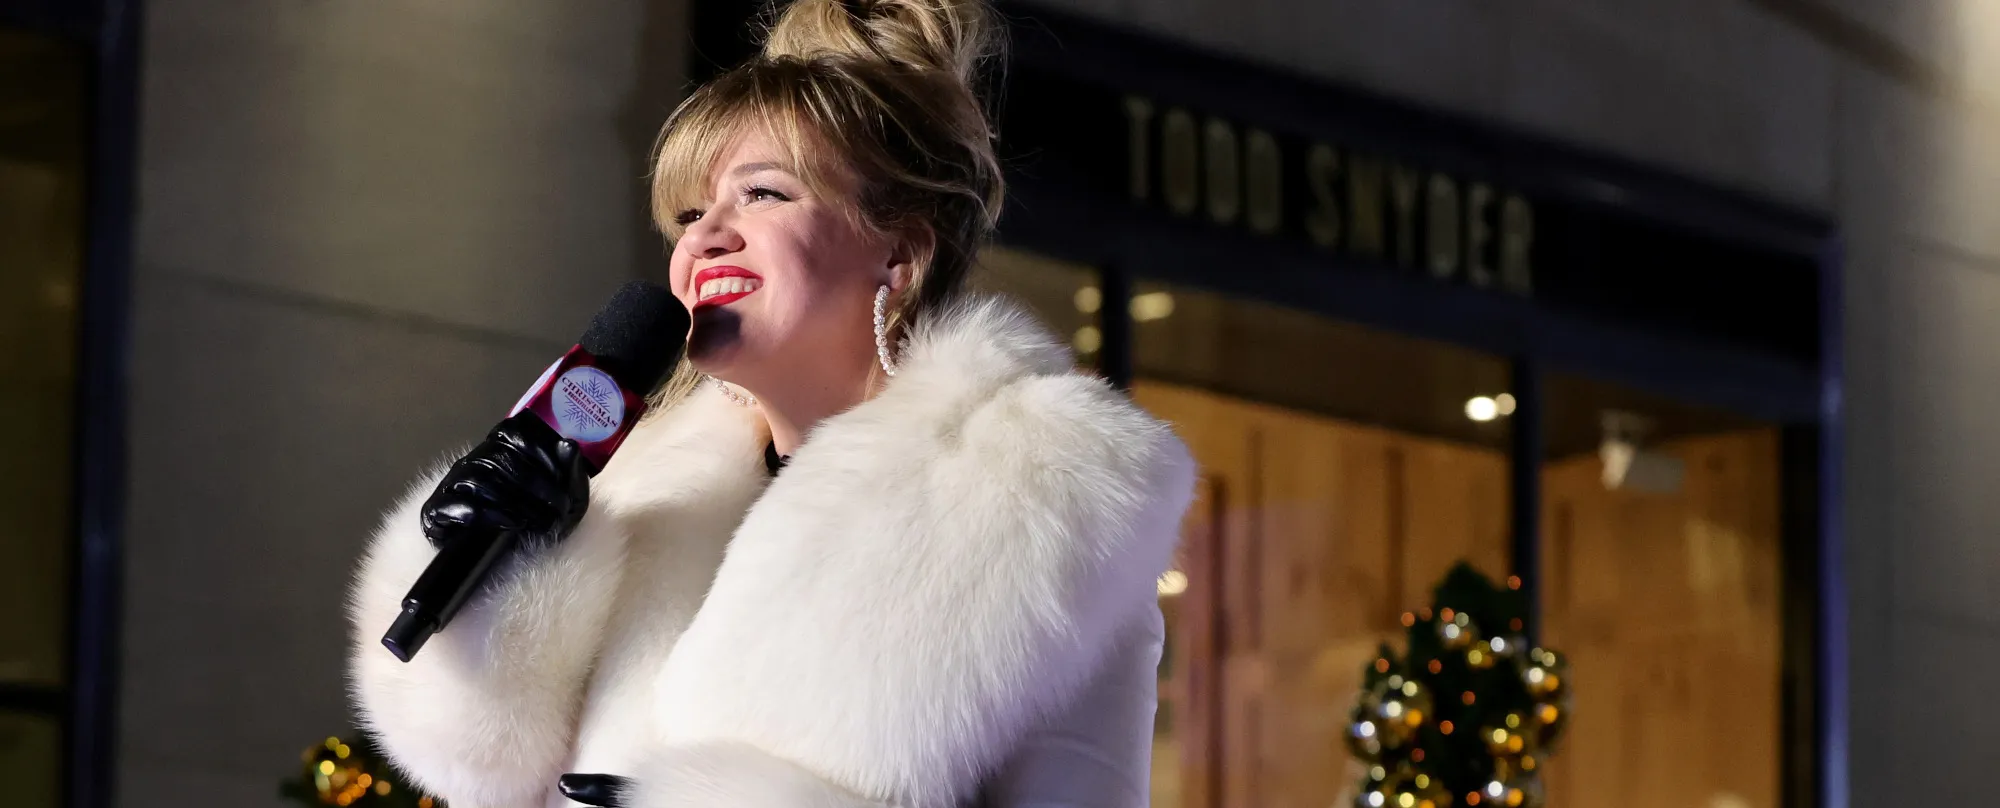 5 Mega-Hit Songs You Didn’t Know Kelly Clarkson Co-Wrote